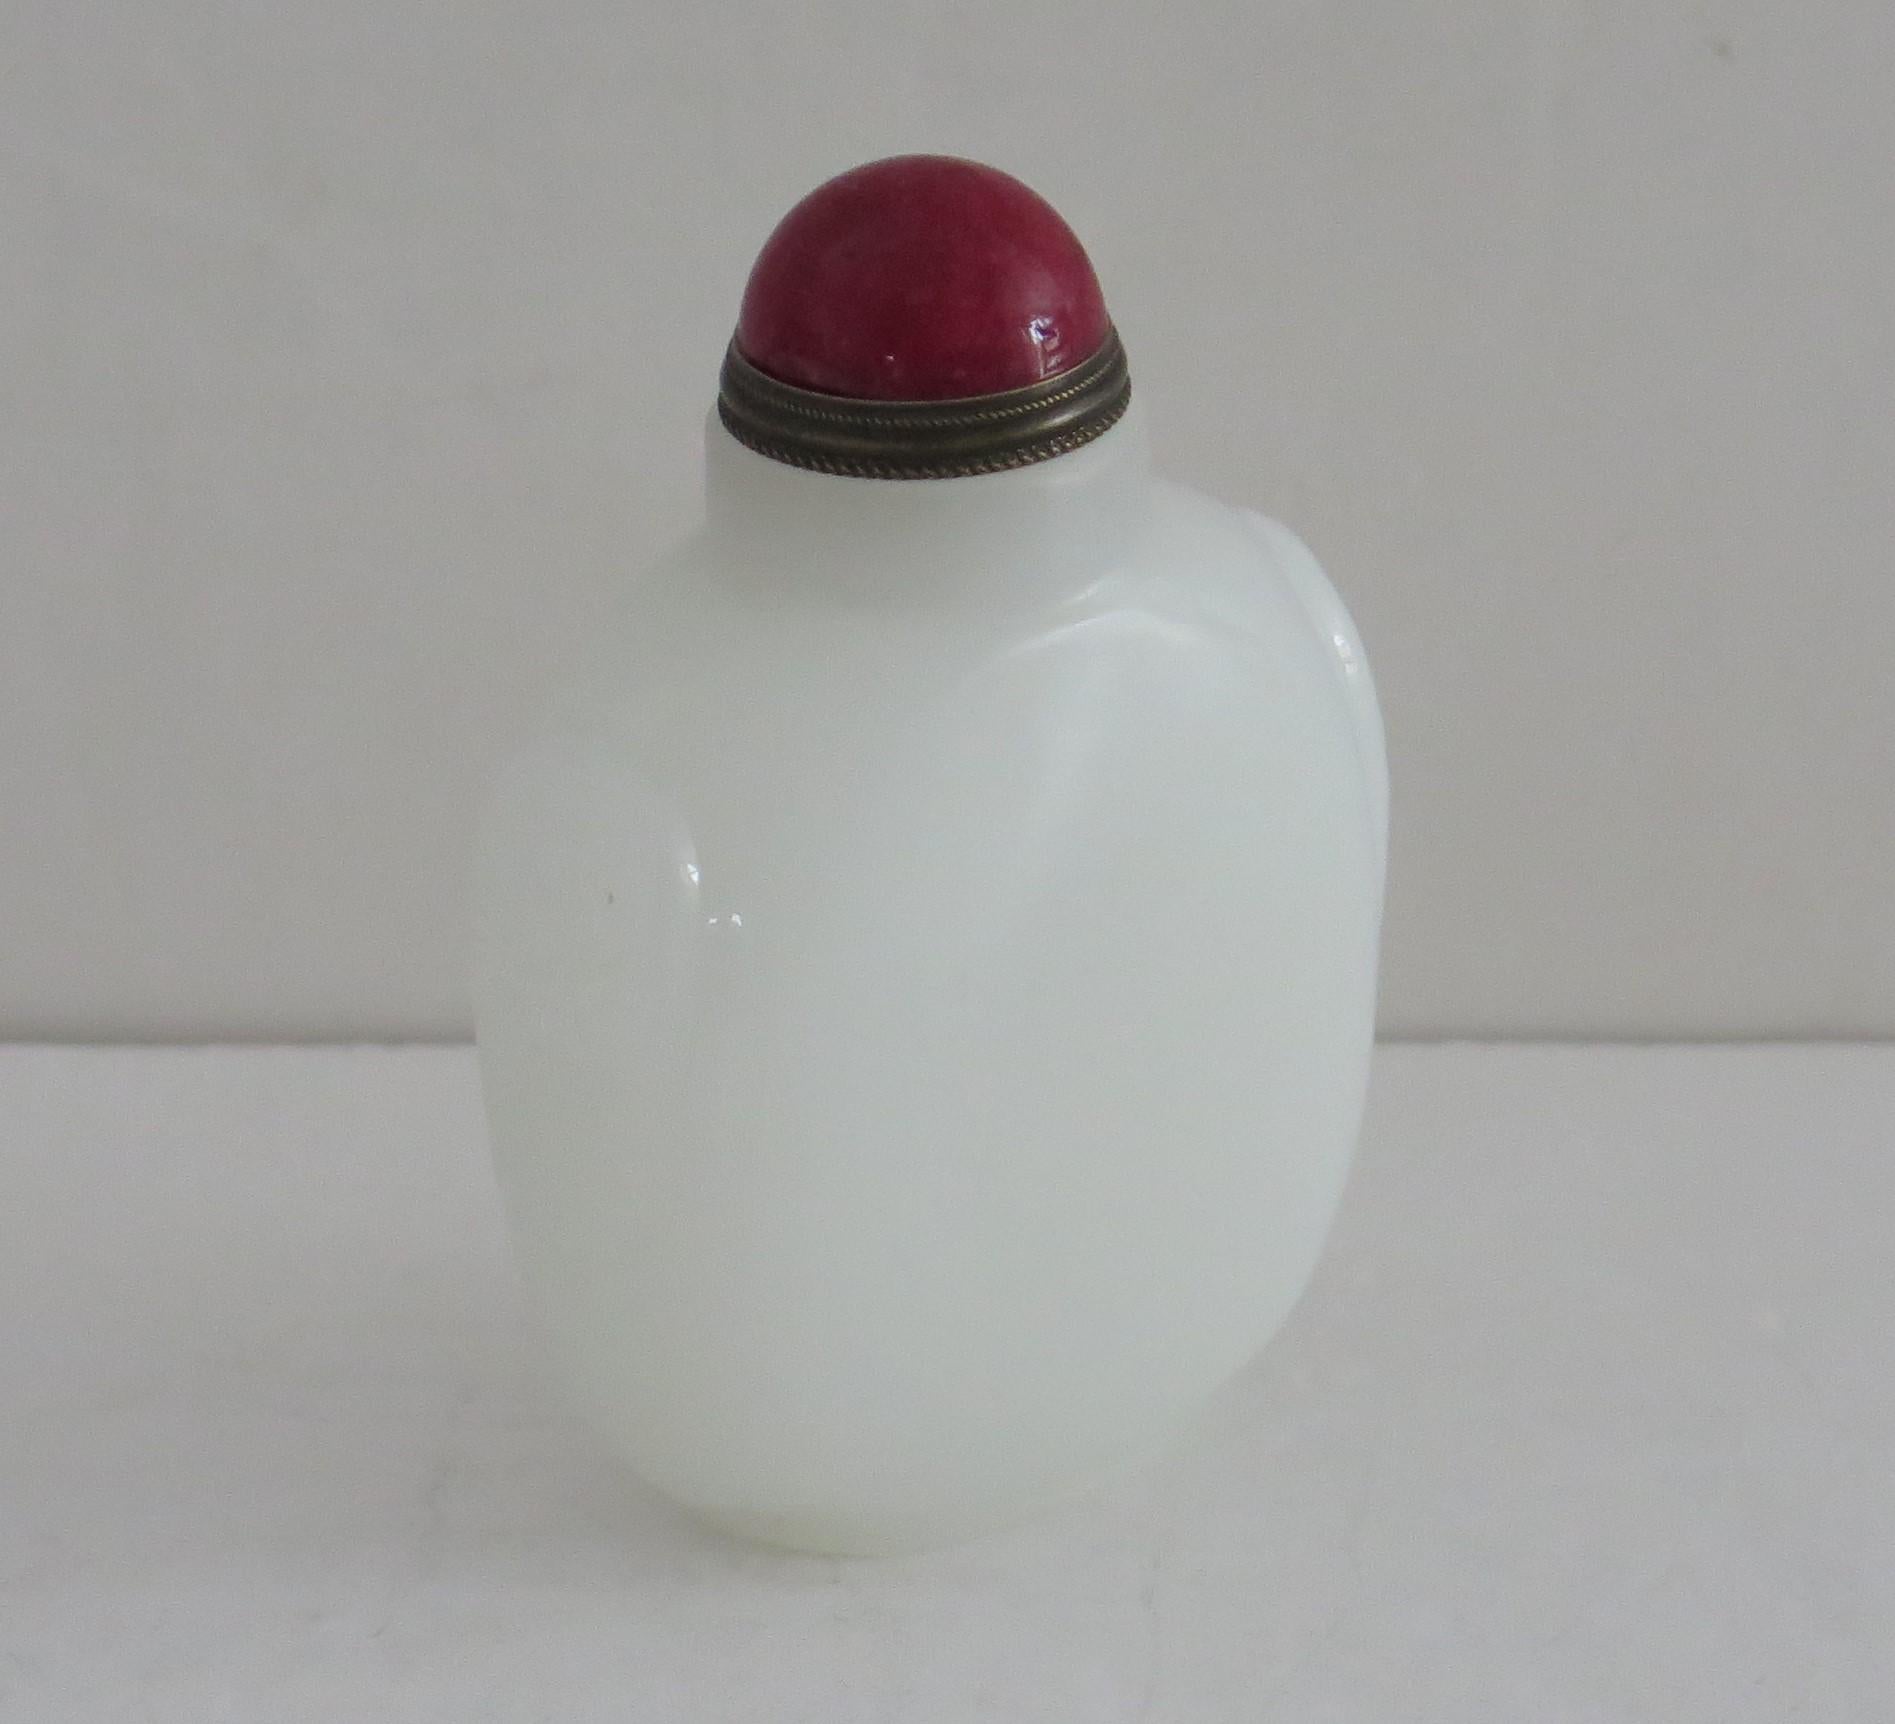 Chinese Snuff Bottle White Stone Hand Carved with Red Stone Spoon Top 2